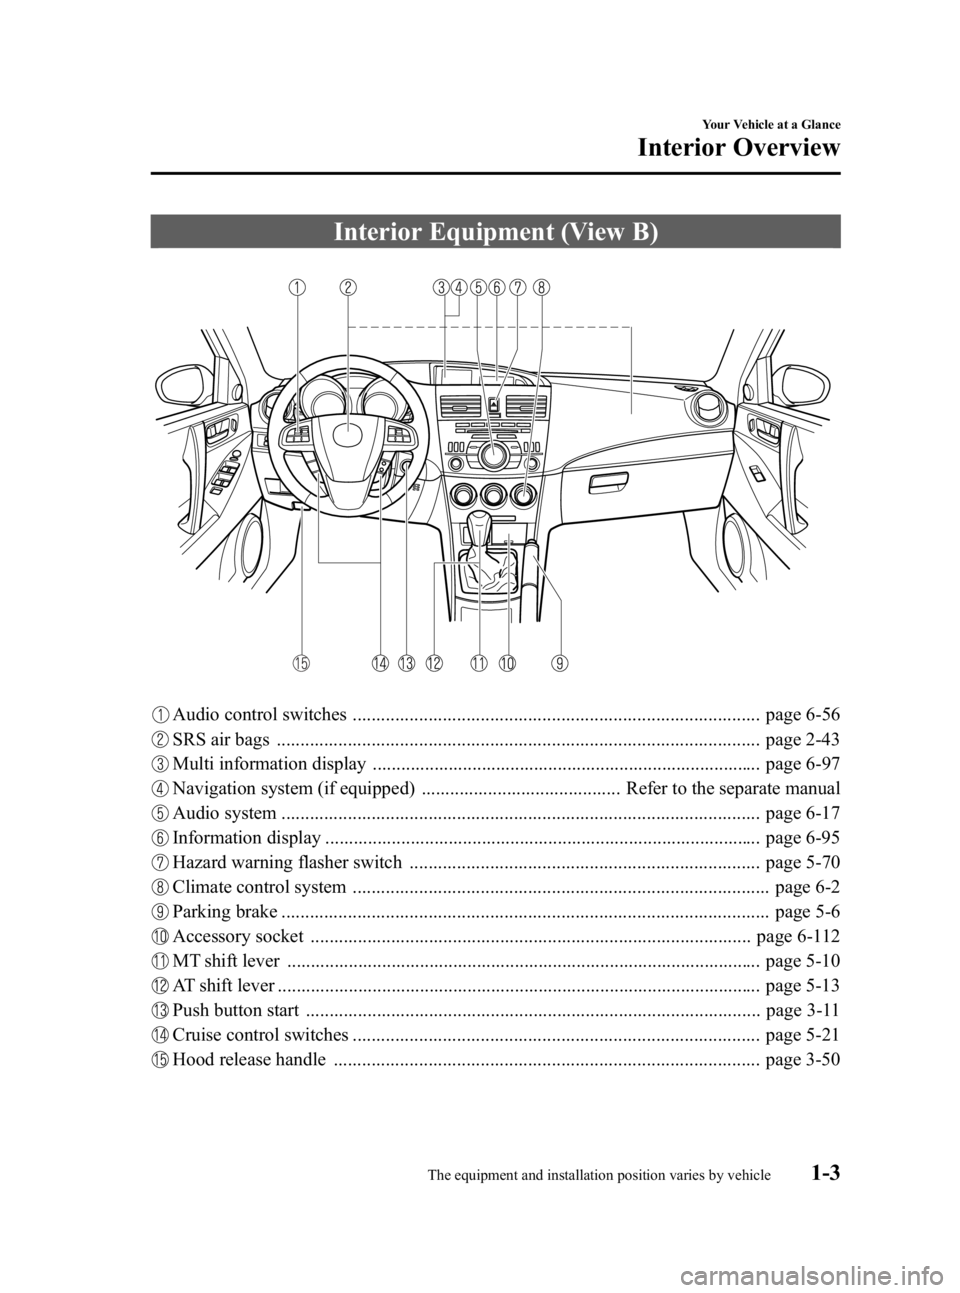 MAZDA MODEL 3 4-DOOR 2010  Owners Manual Black plate (9,1)
Interior Equipment (View B)
Audio control switches ...................................................................................... page 6-56
SRS air bags .....................